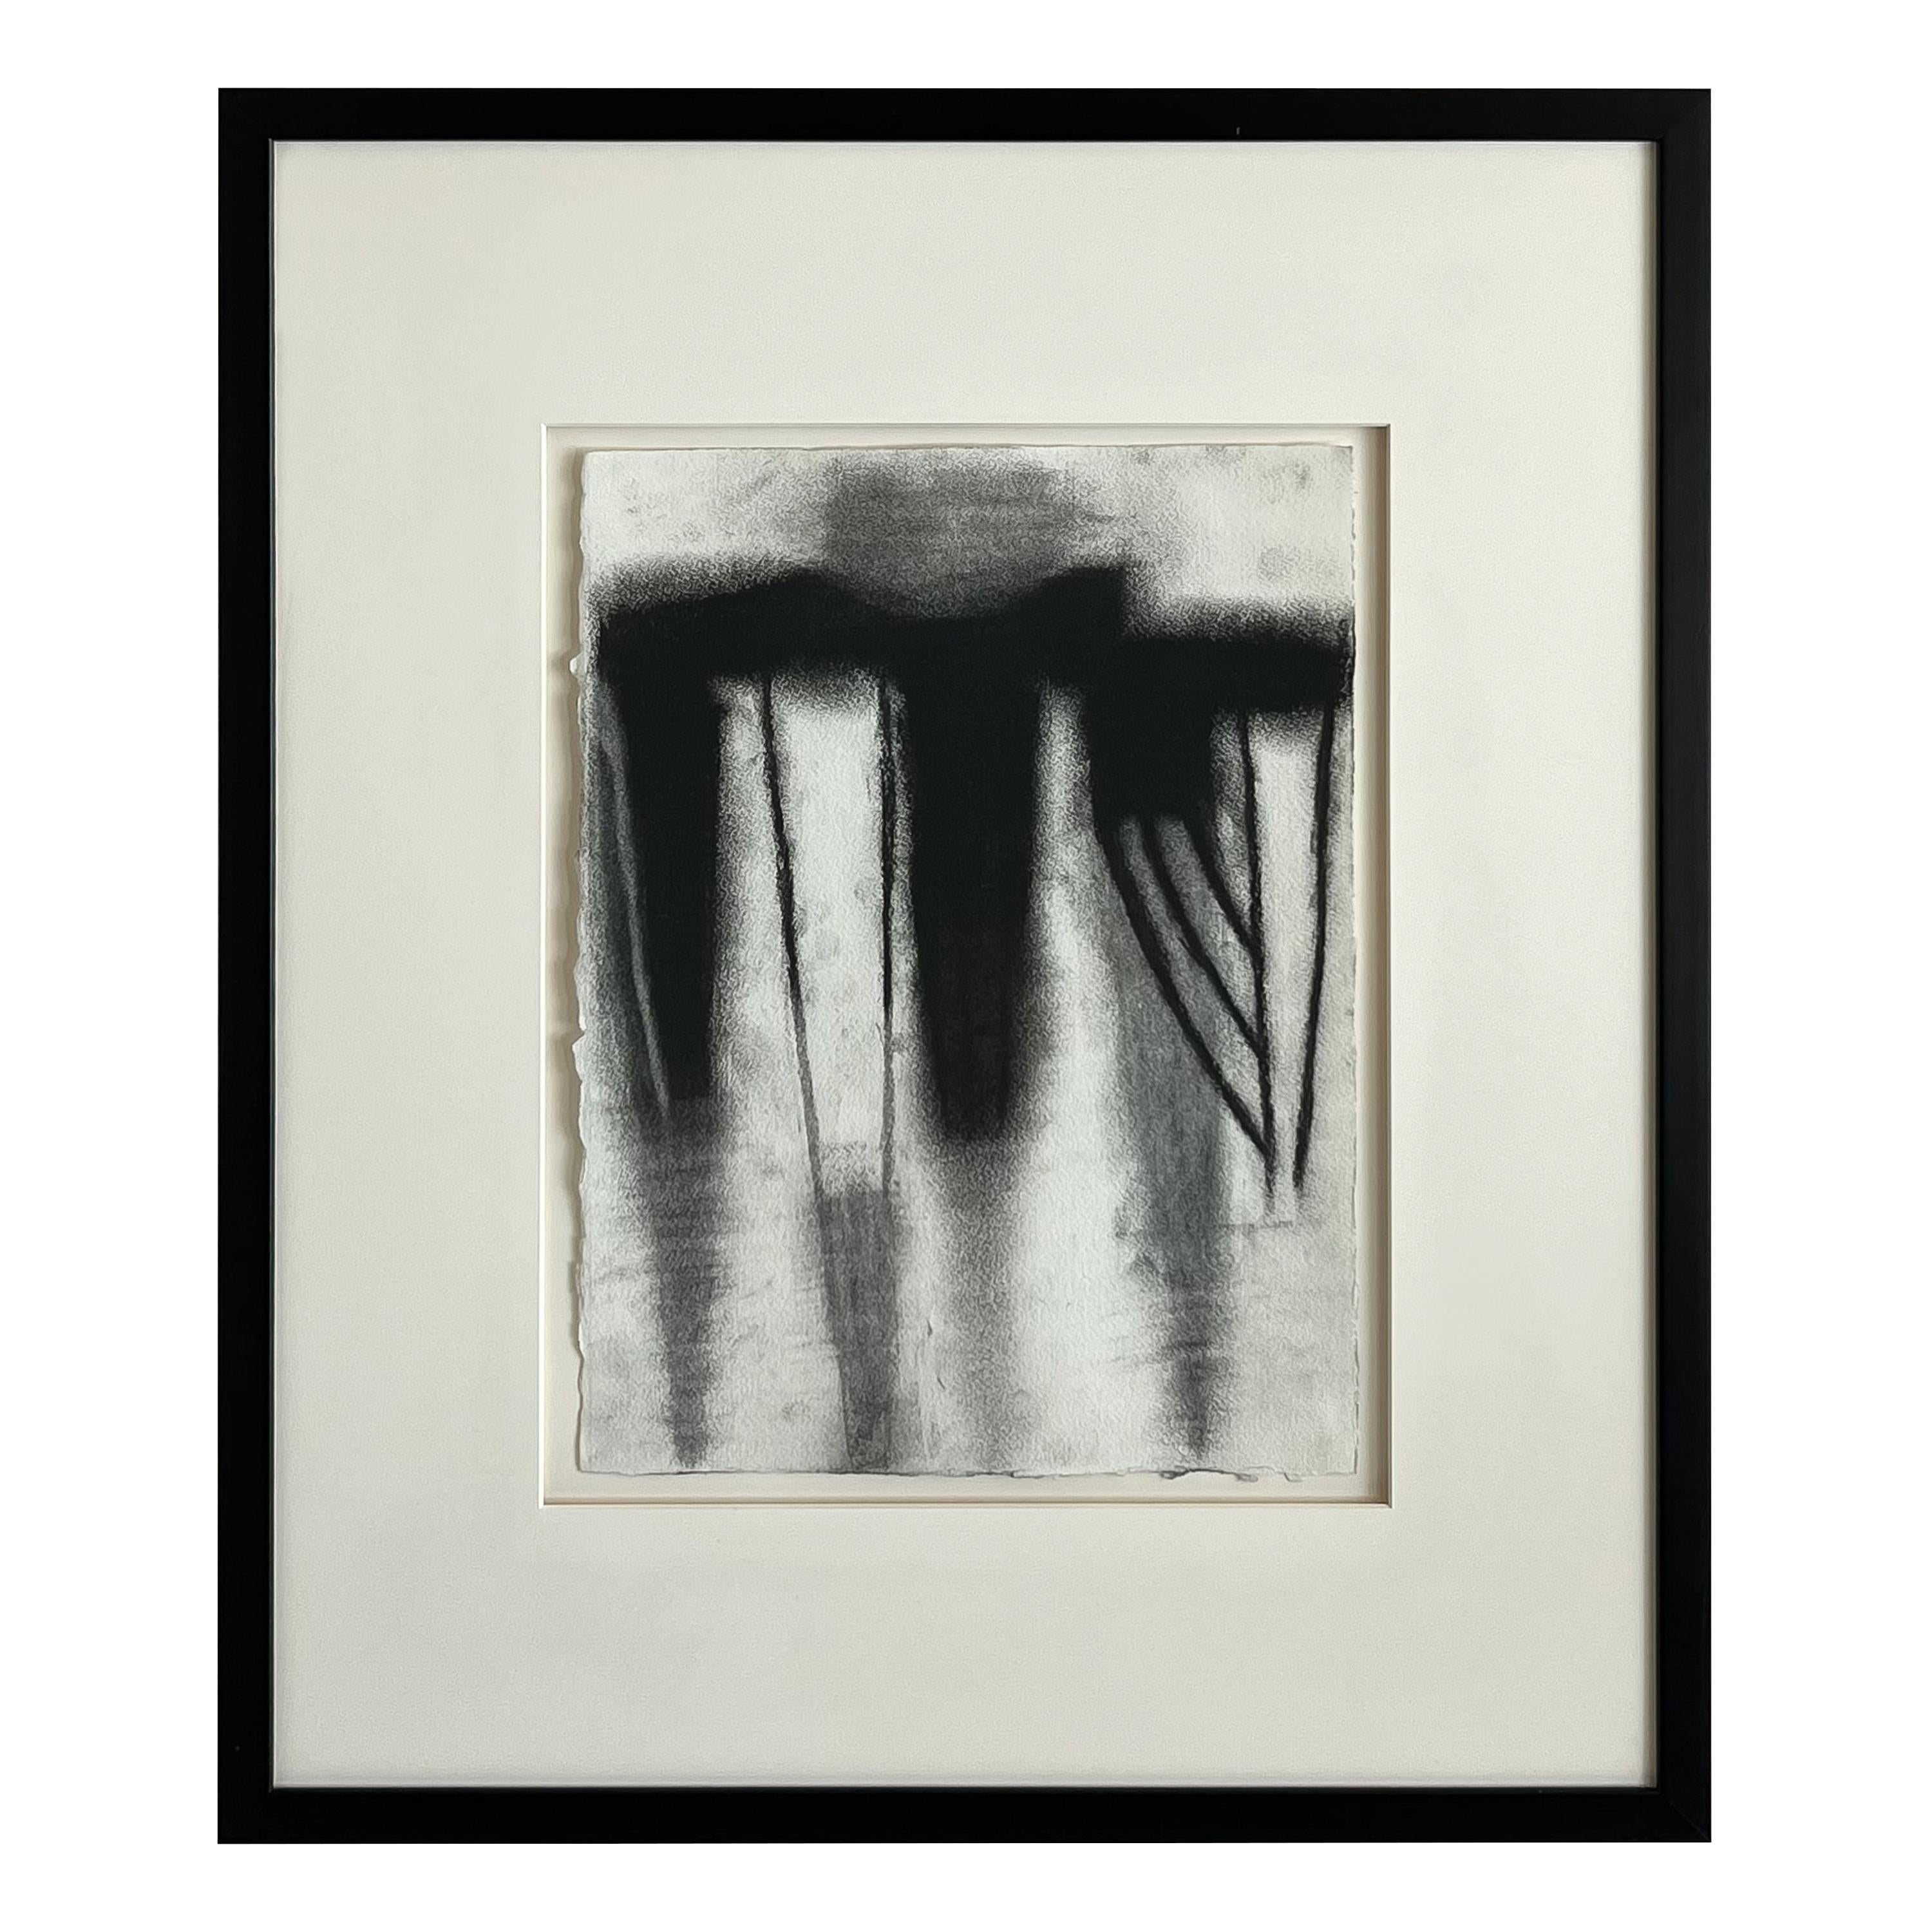 Modernist framed abstract charcoal drawings by Vladimir Ketchens, circa 1993. Untitled 1, 2 and 3. Signed en verso. Striking black and white drawings on paper with raw edges. Float mounted, matted and framed in a 3/4 